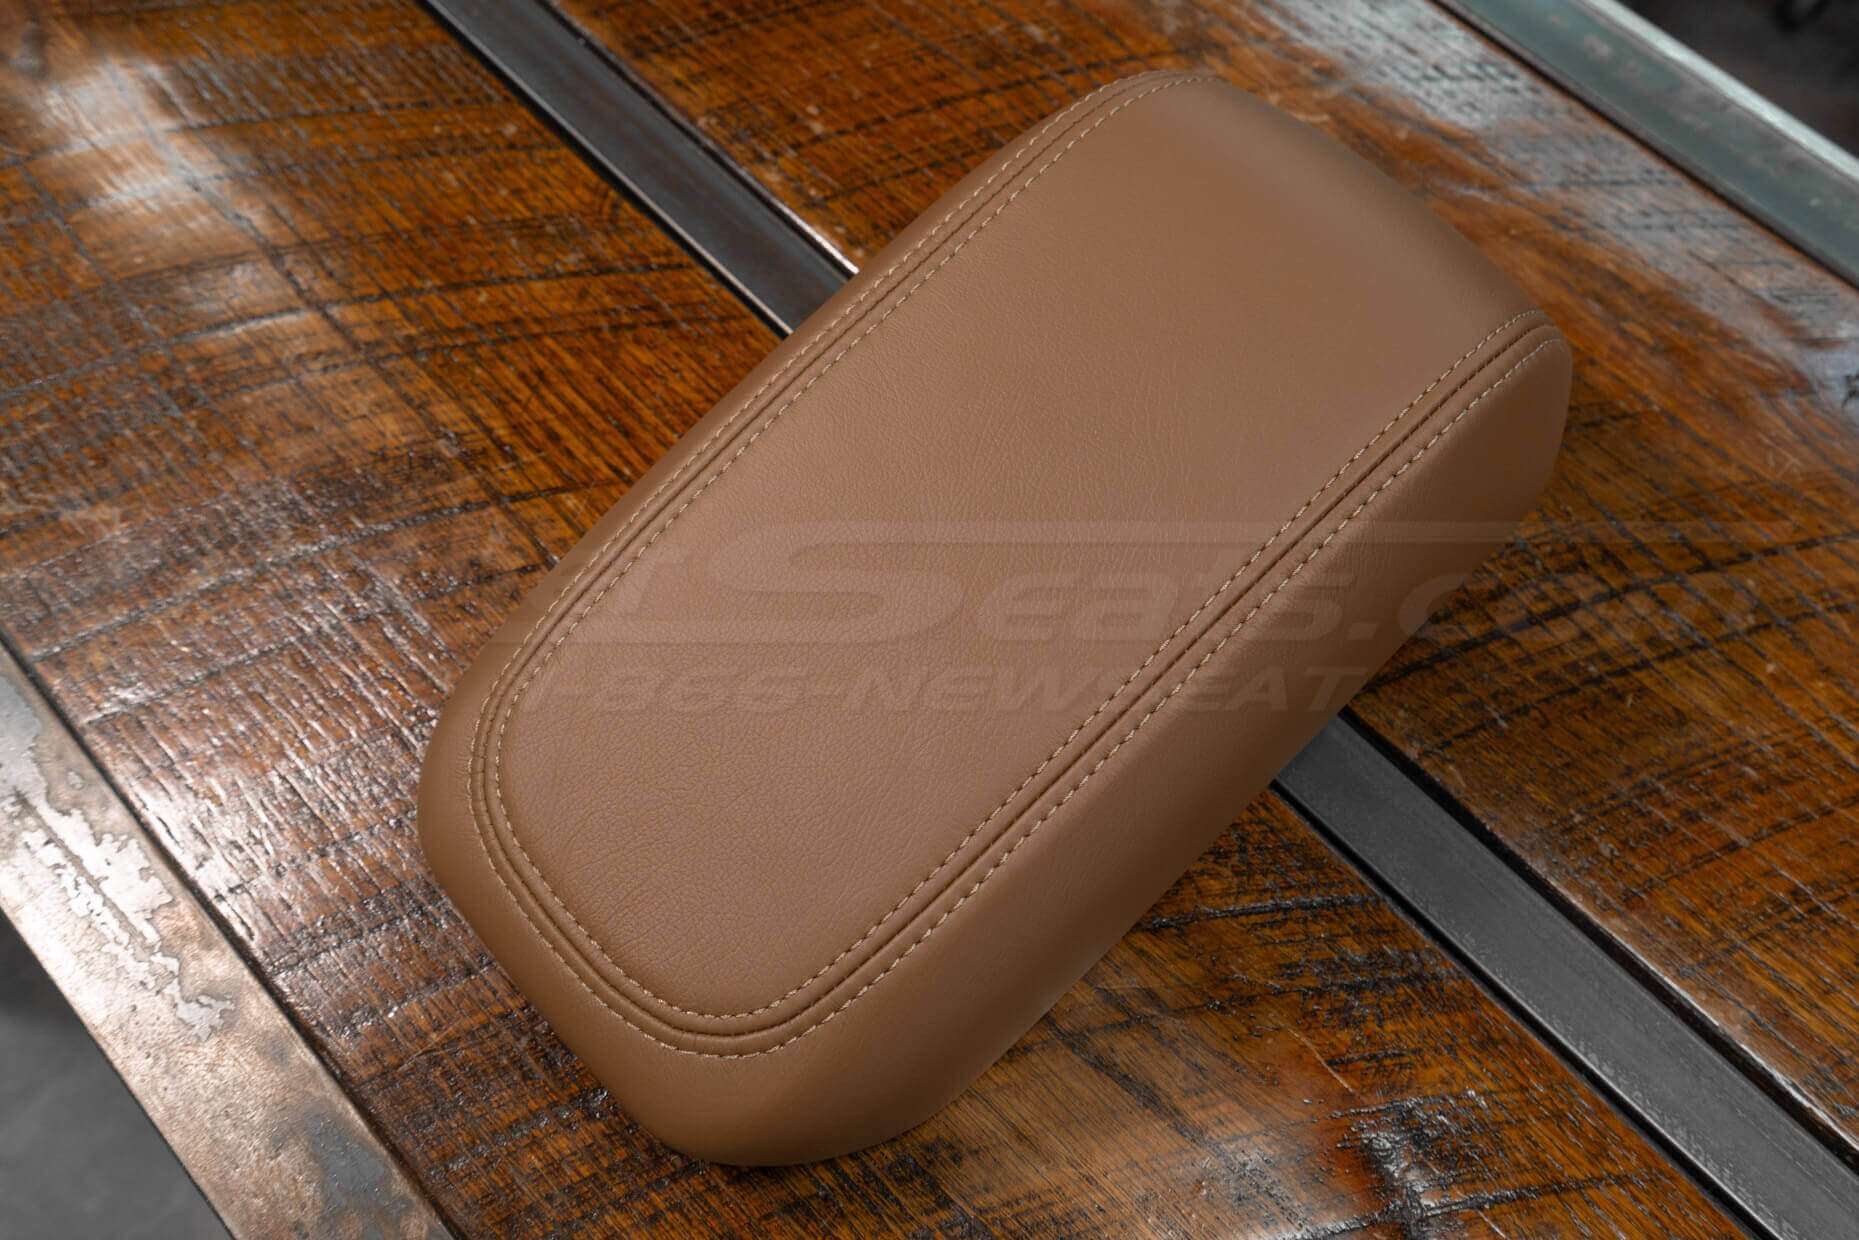 Top-down side view of 2022 Ford Maverick Leather Console Lid Cover